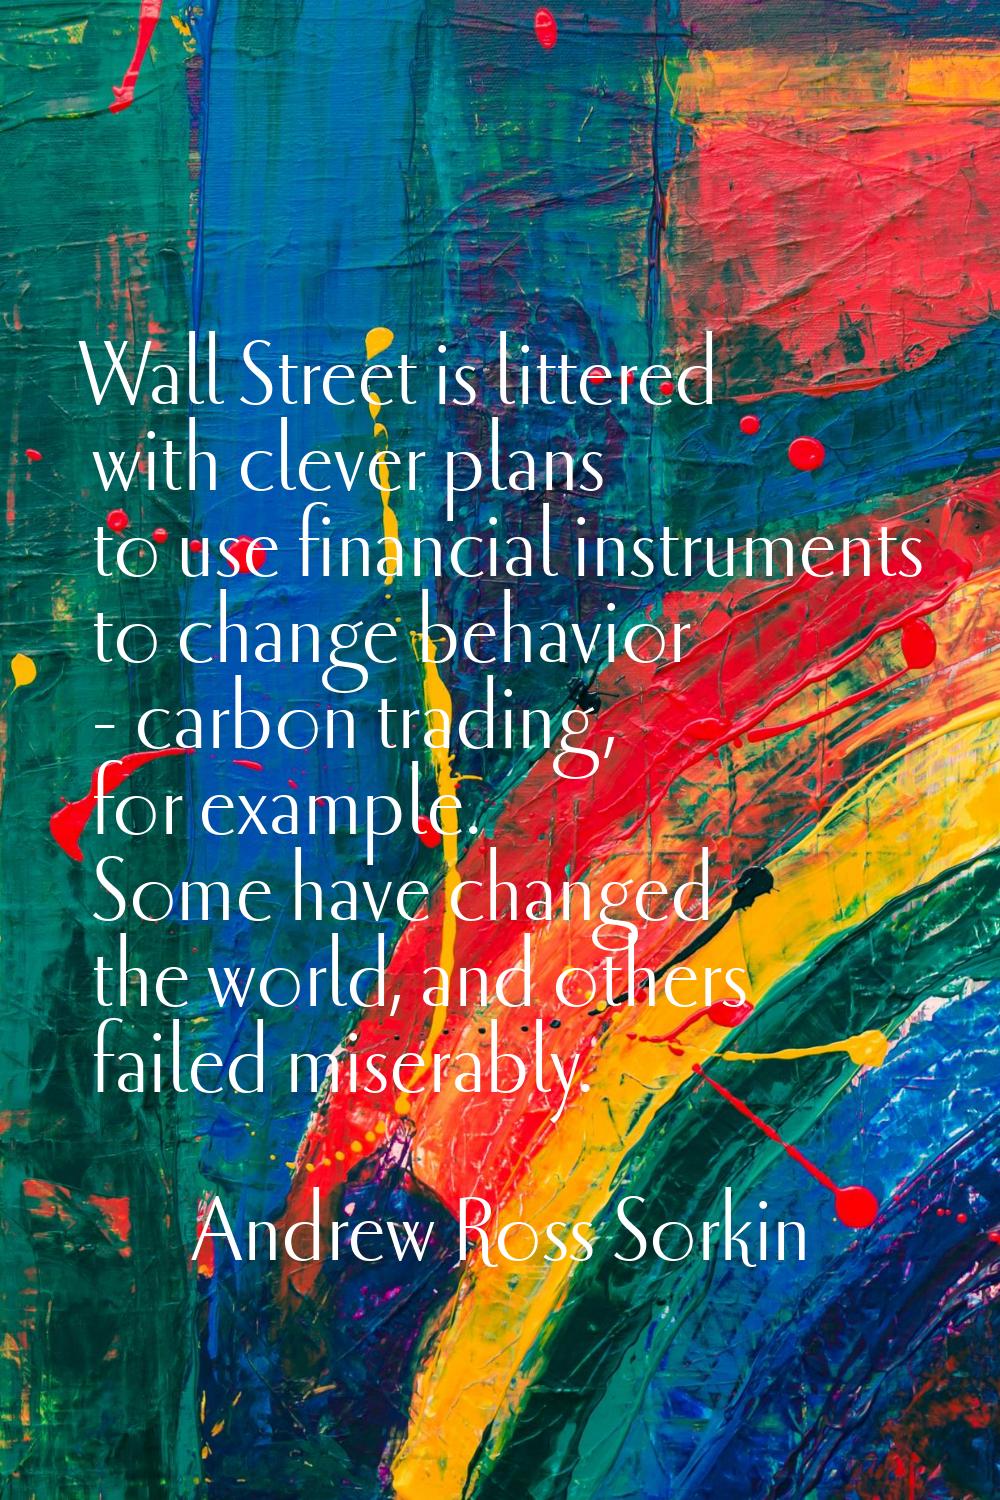 Wall Street is littered with clever plans to use financial instruments to change behavior - carbon 